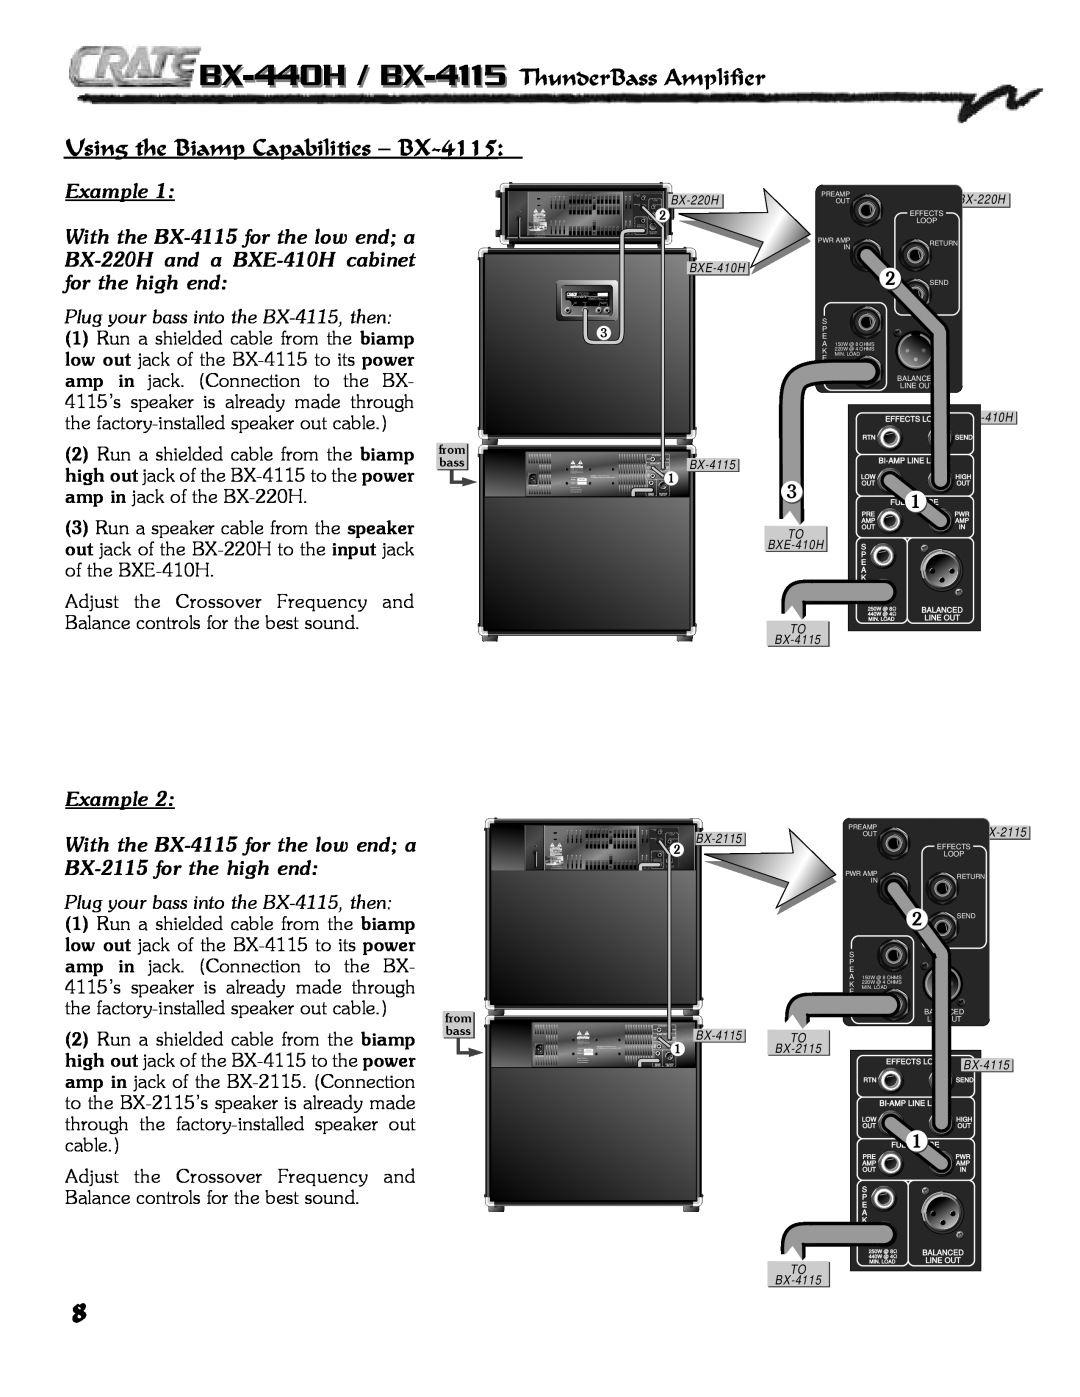 Crate Amplifiers BX-440H Using the Biamp Capabilities - BX-4115, Plug your bass into the BX-4115, then, Example 